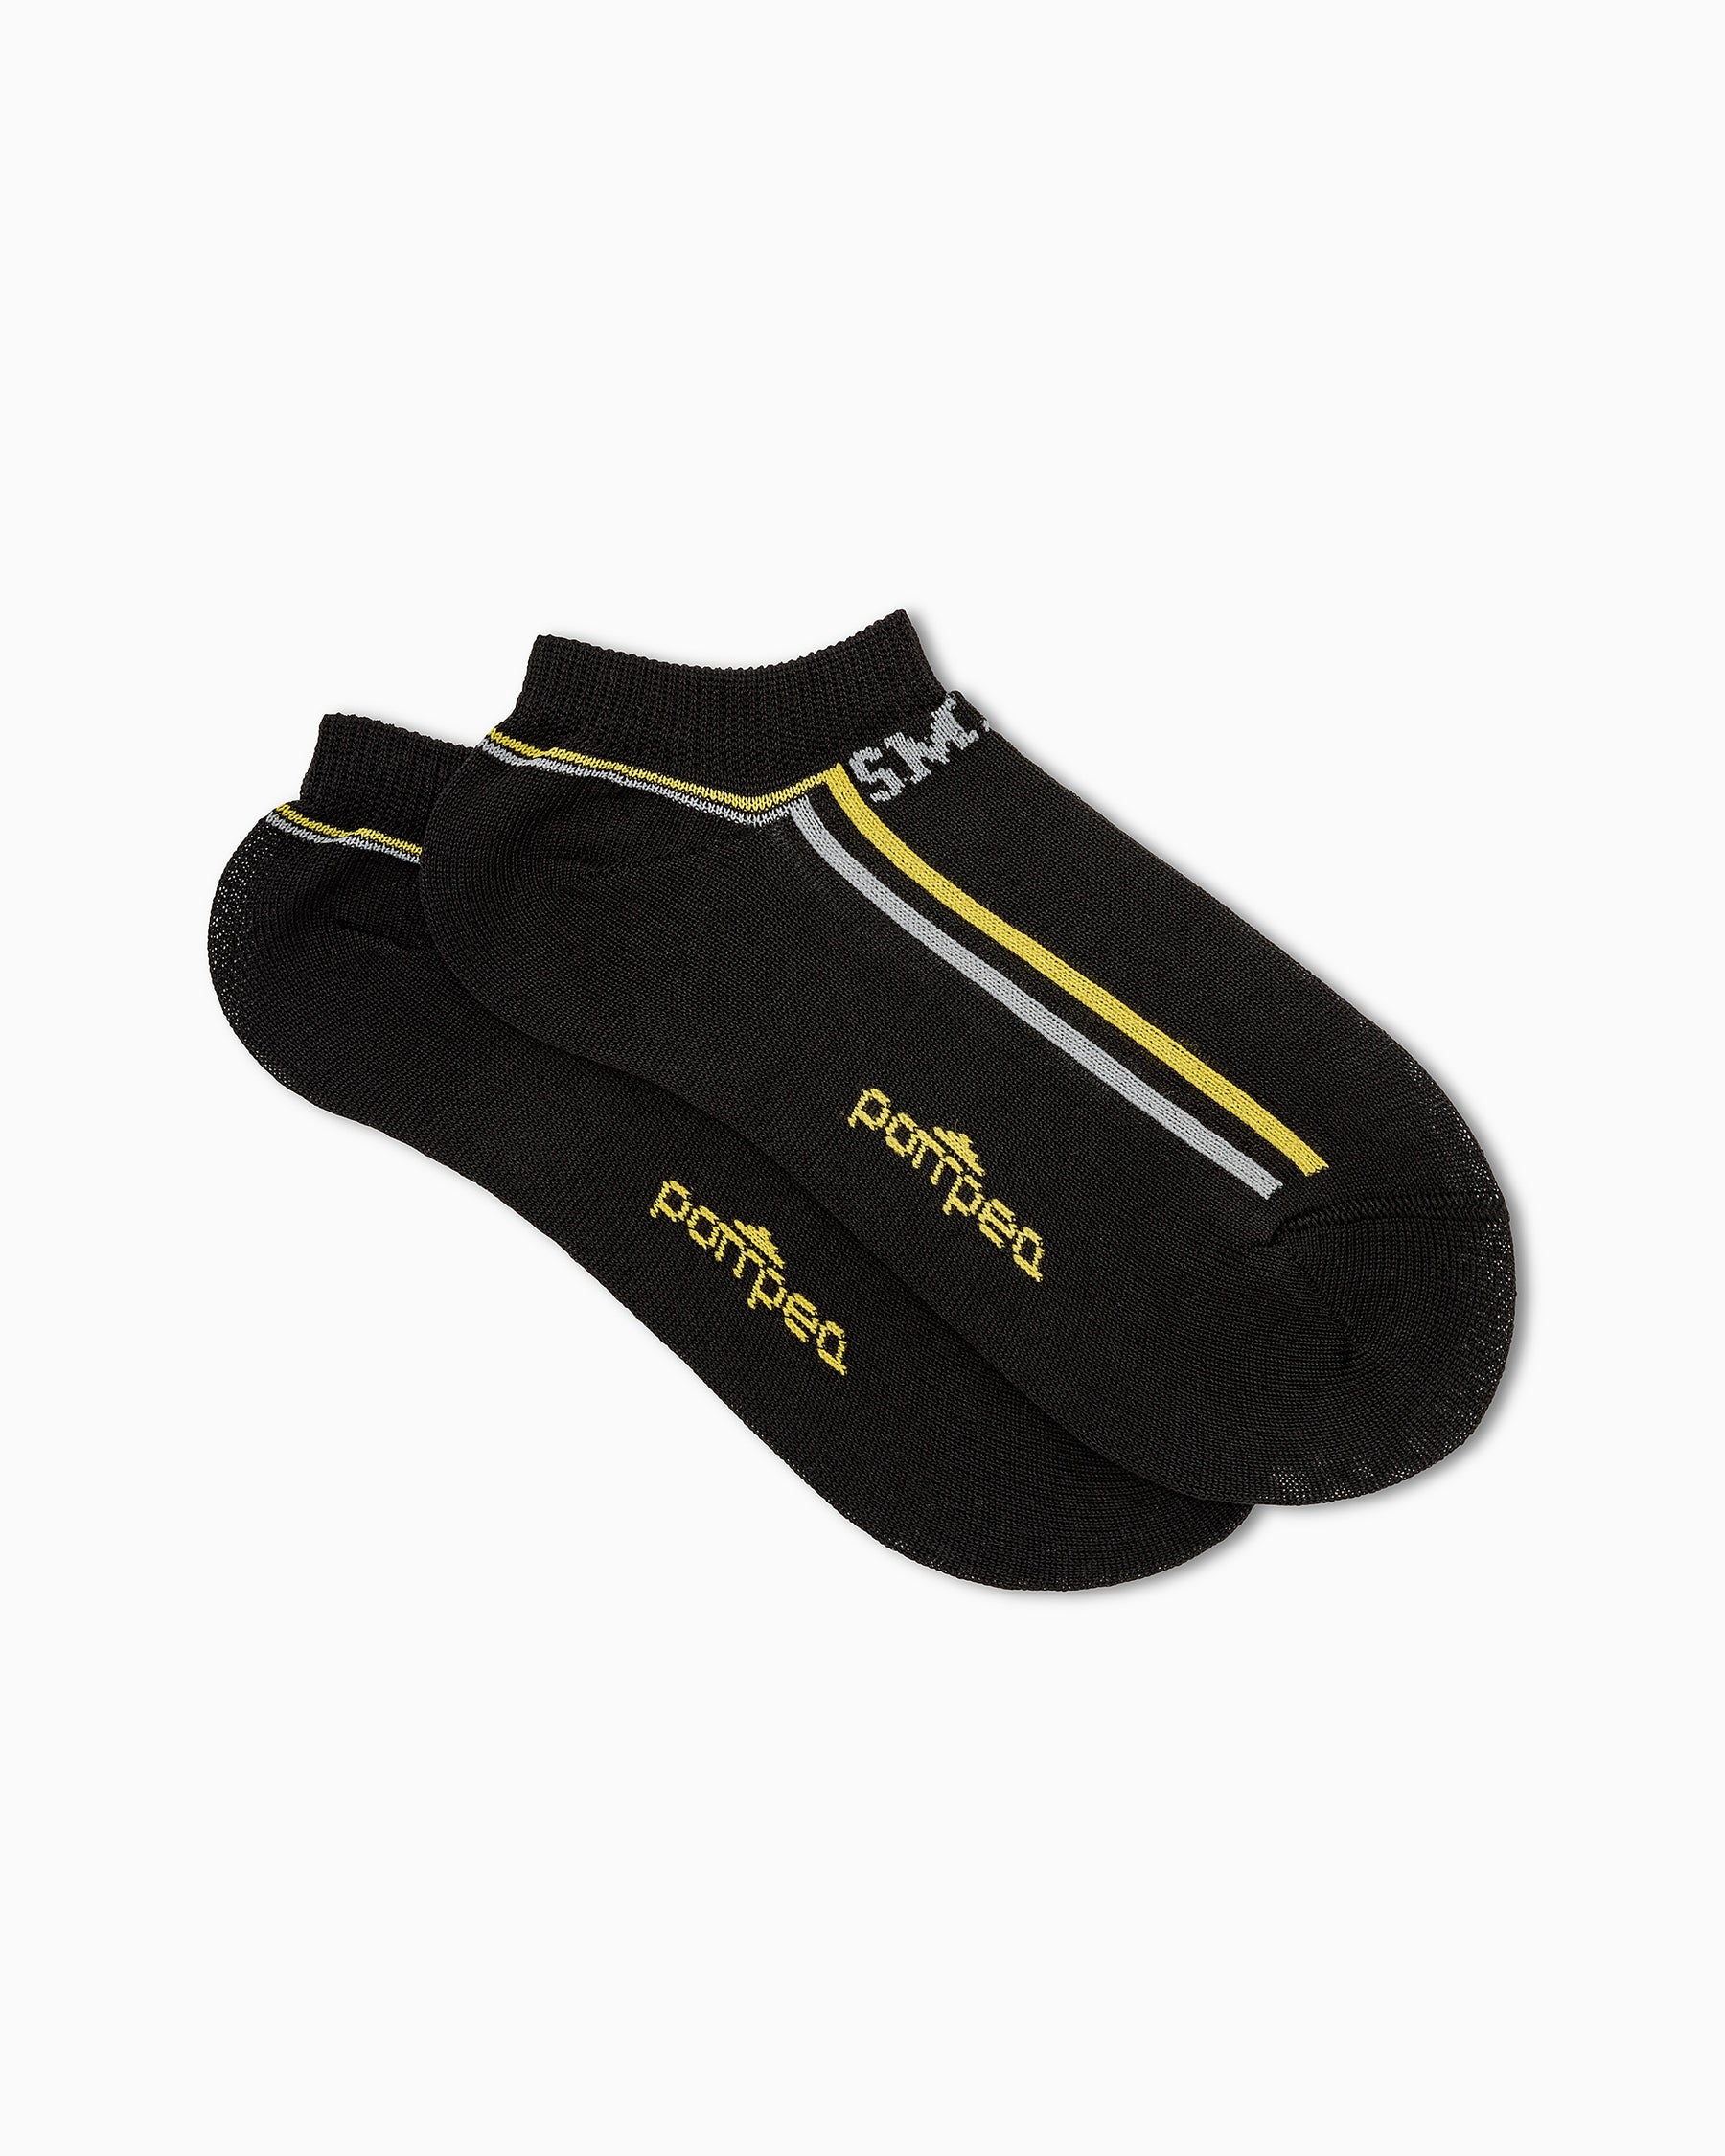 BOYS' ALLOCCO TRAINER LINERS